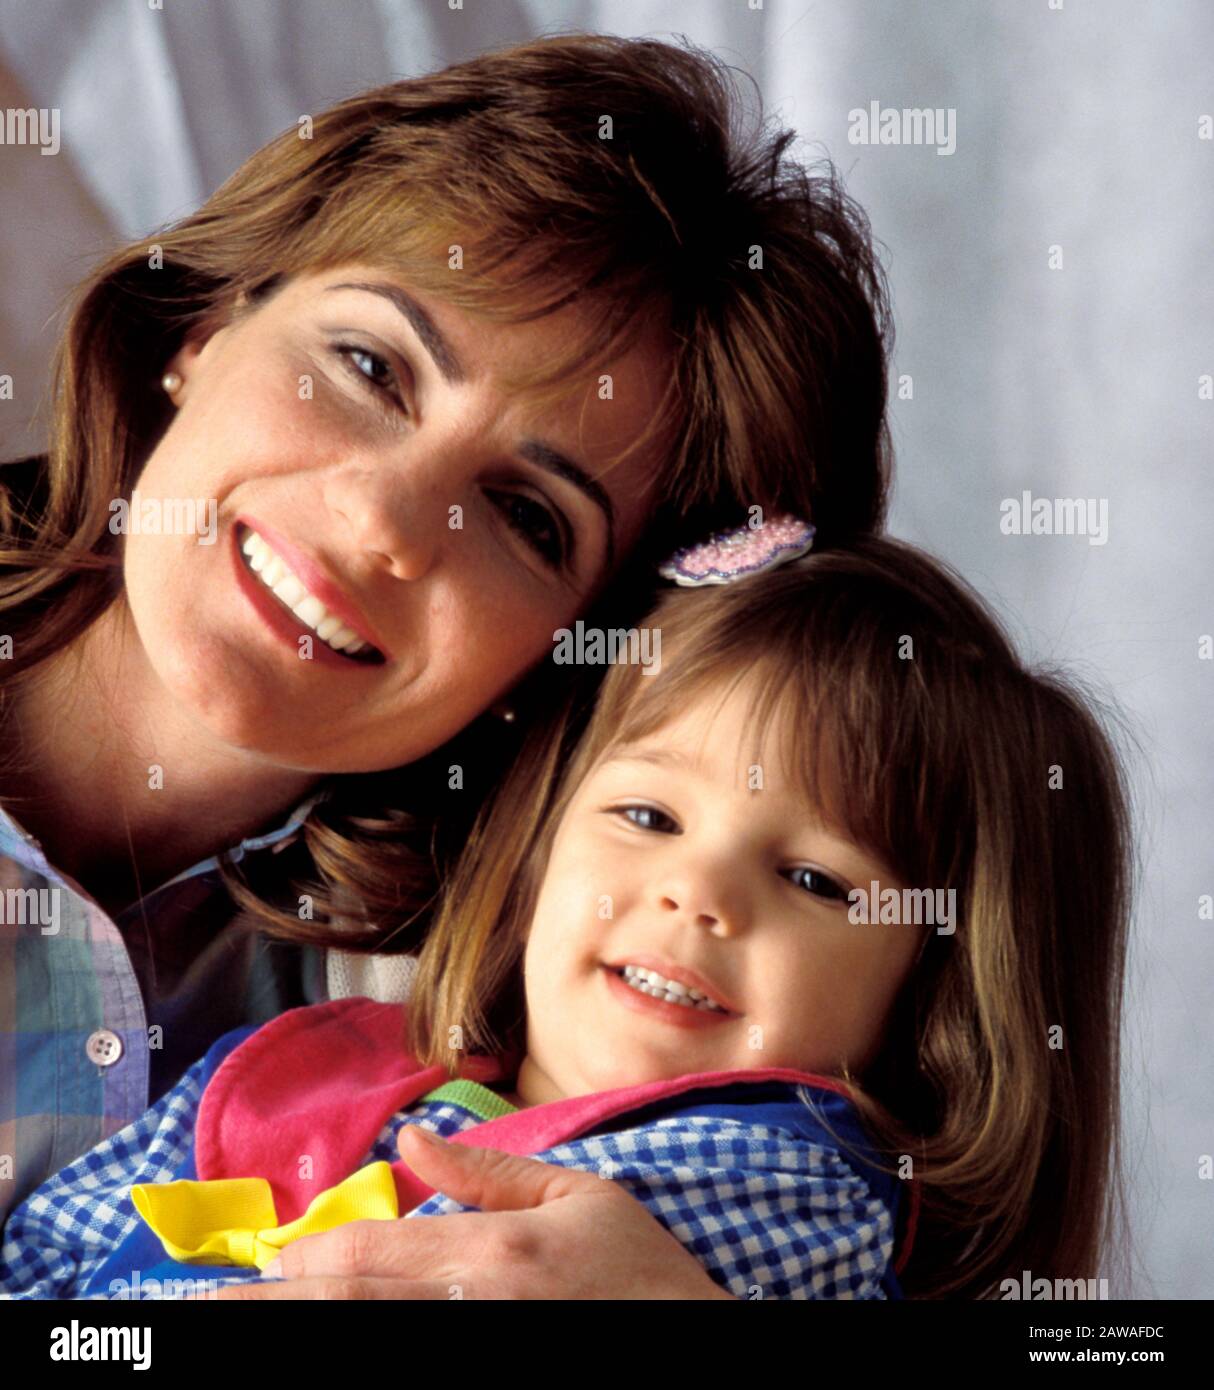 Portrait of a  smiling Caucasian mother and daughter Stock Photo